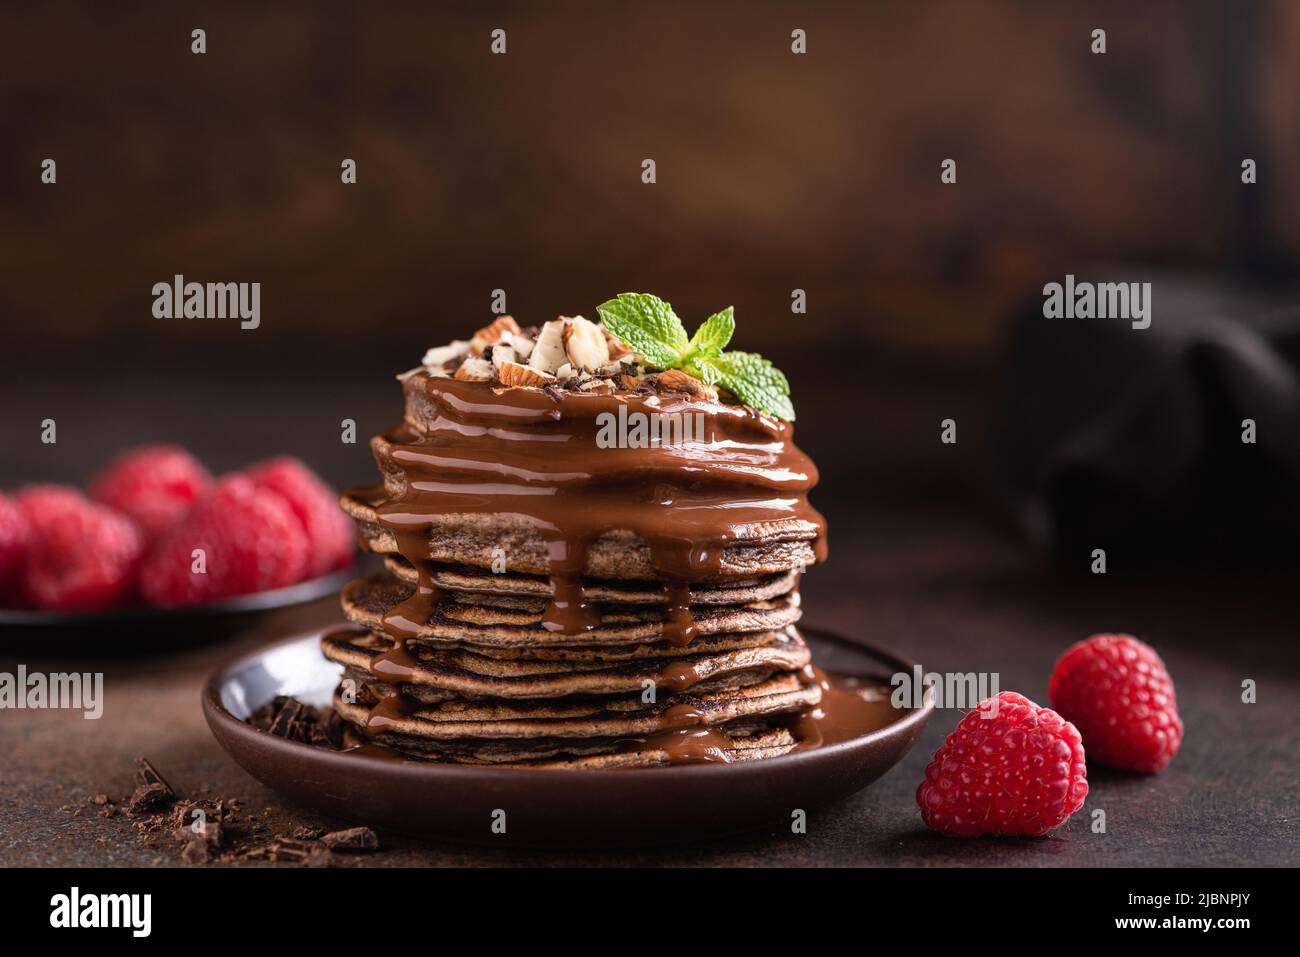 Stack of chocolate pancakes with sauce and raspberries Stock Photo